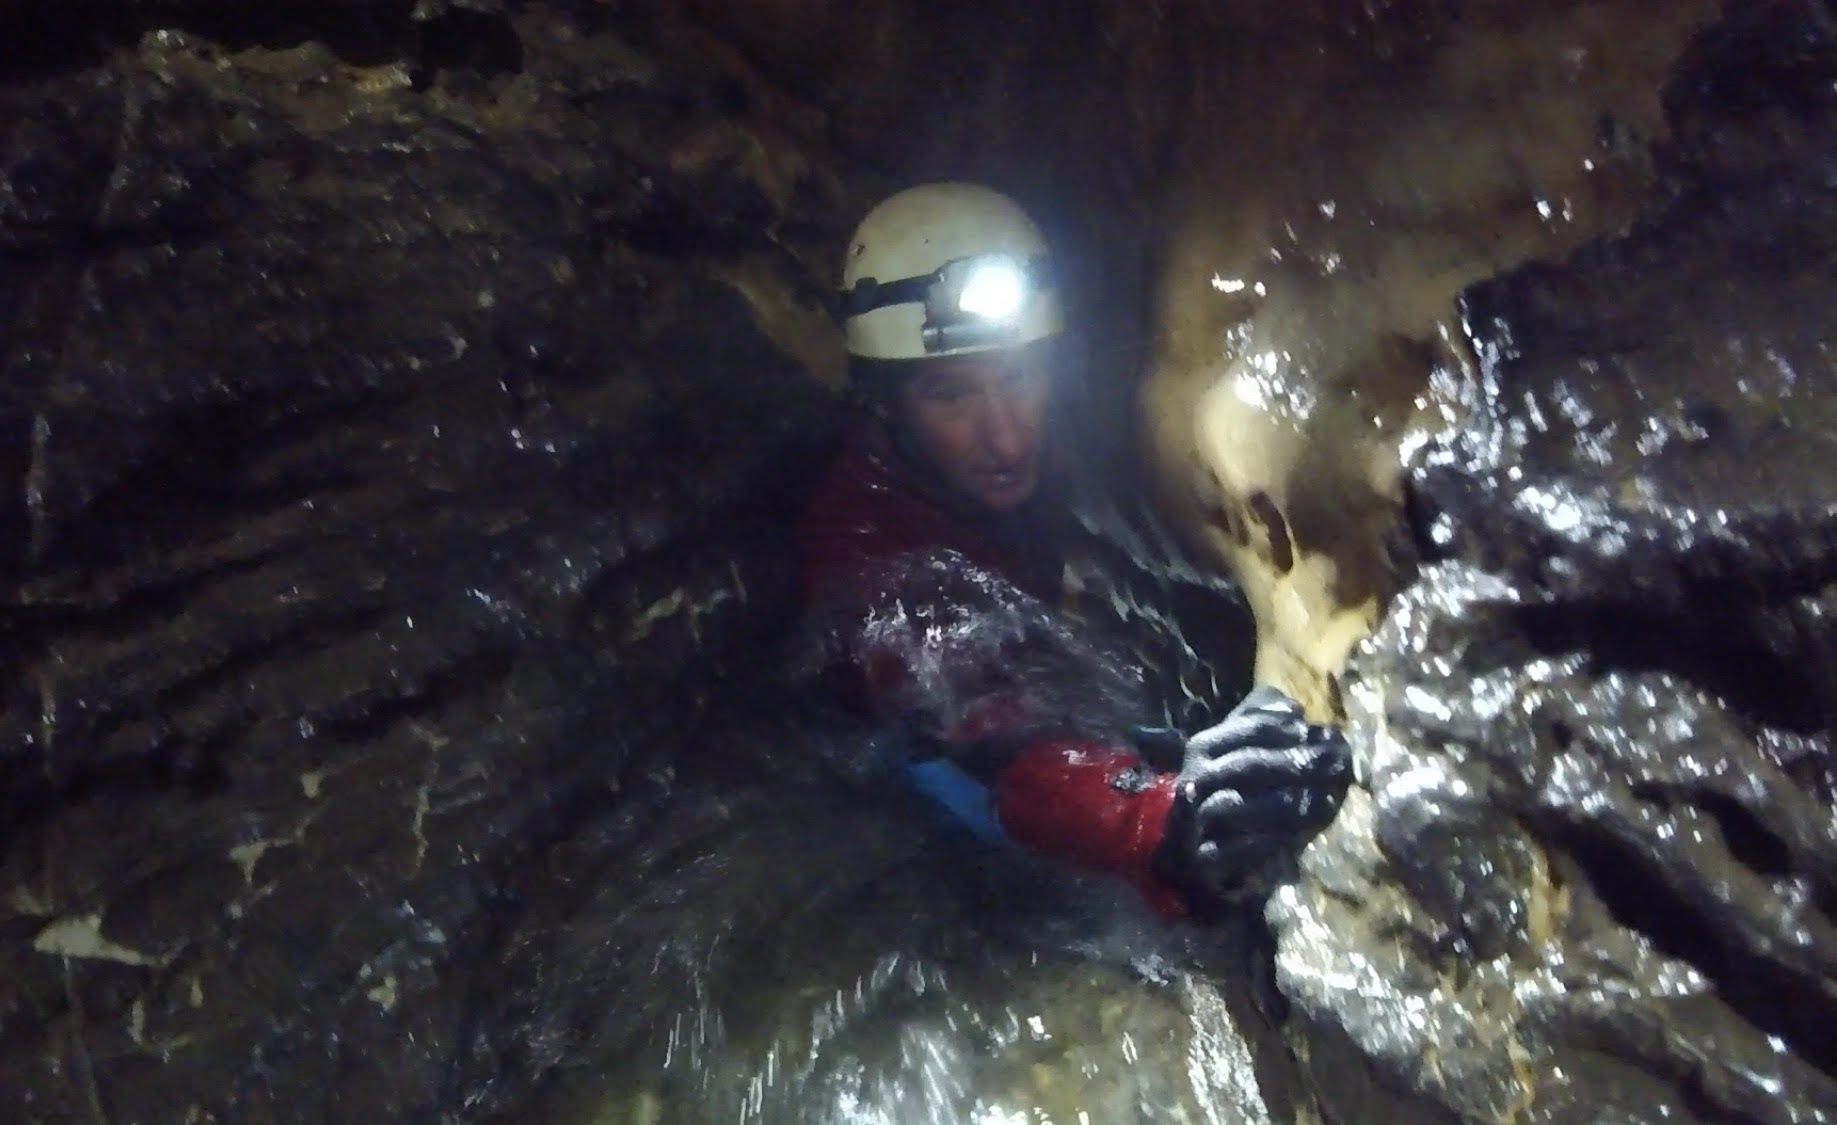 A wet caving experience!